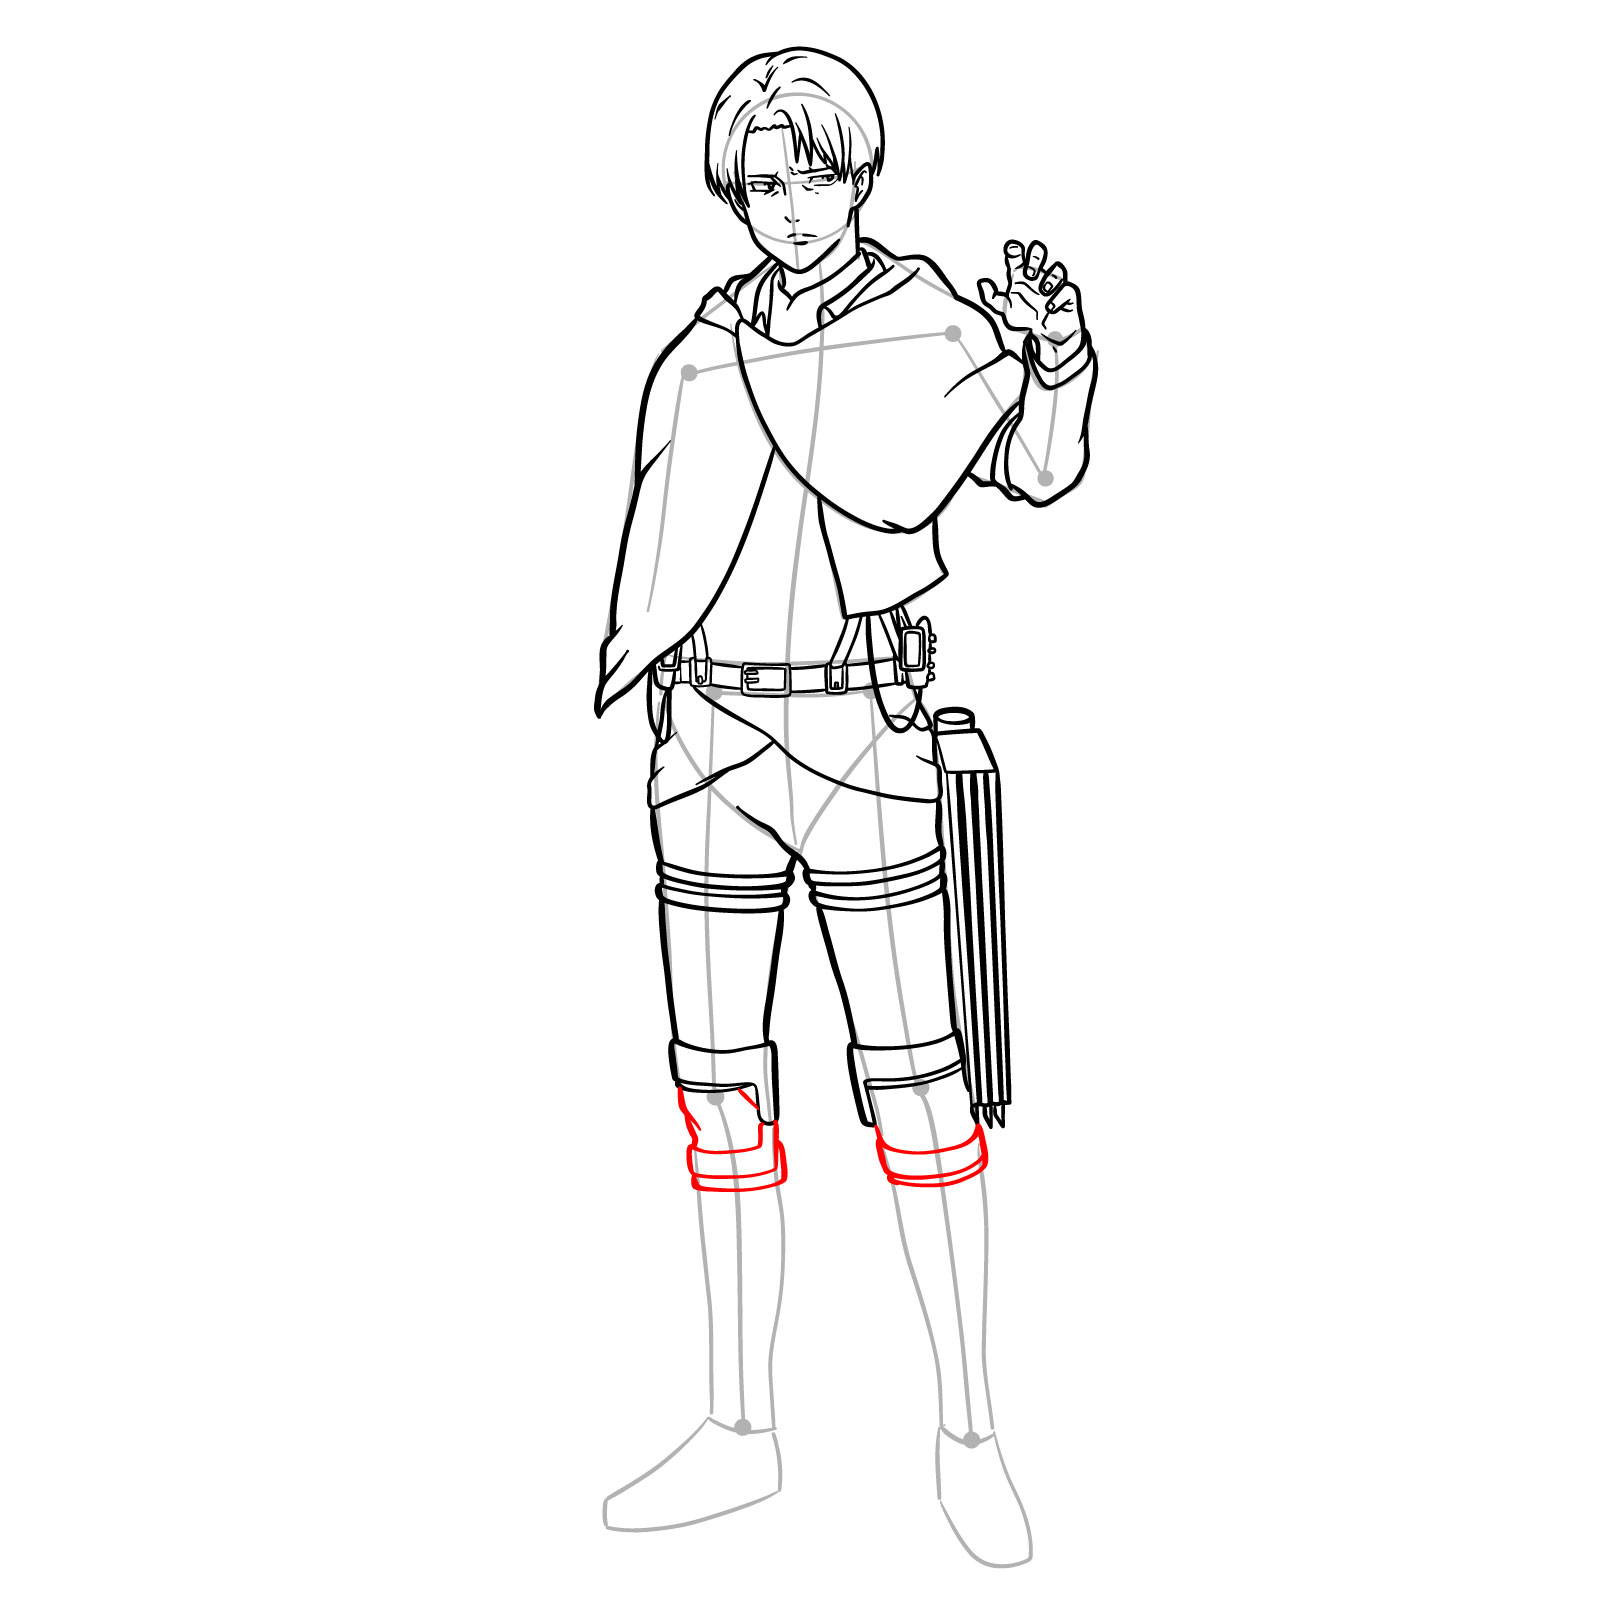 Step-by-step drawing of Levi Ackerman's legs and boots with detailed straps and soles - step 22